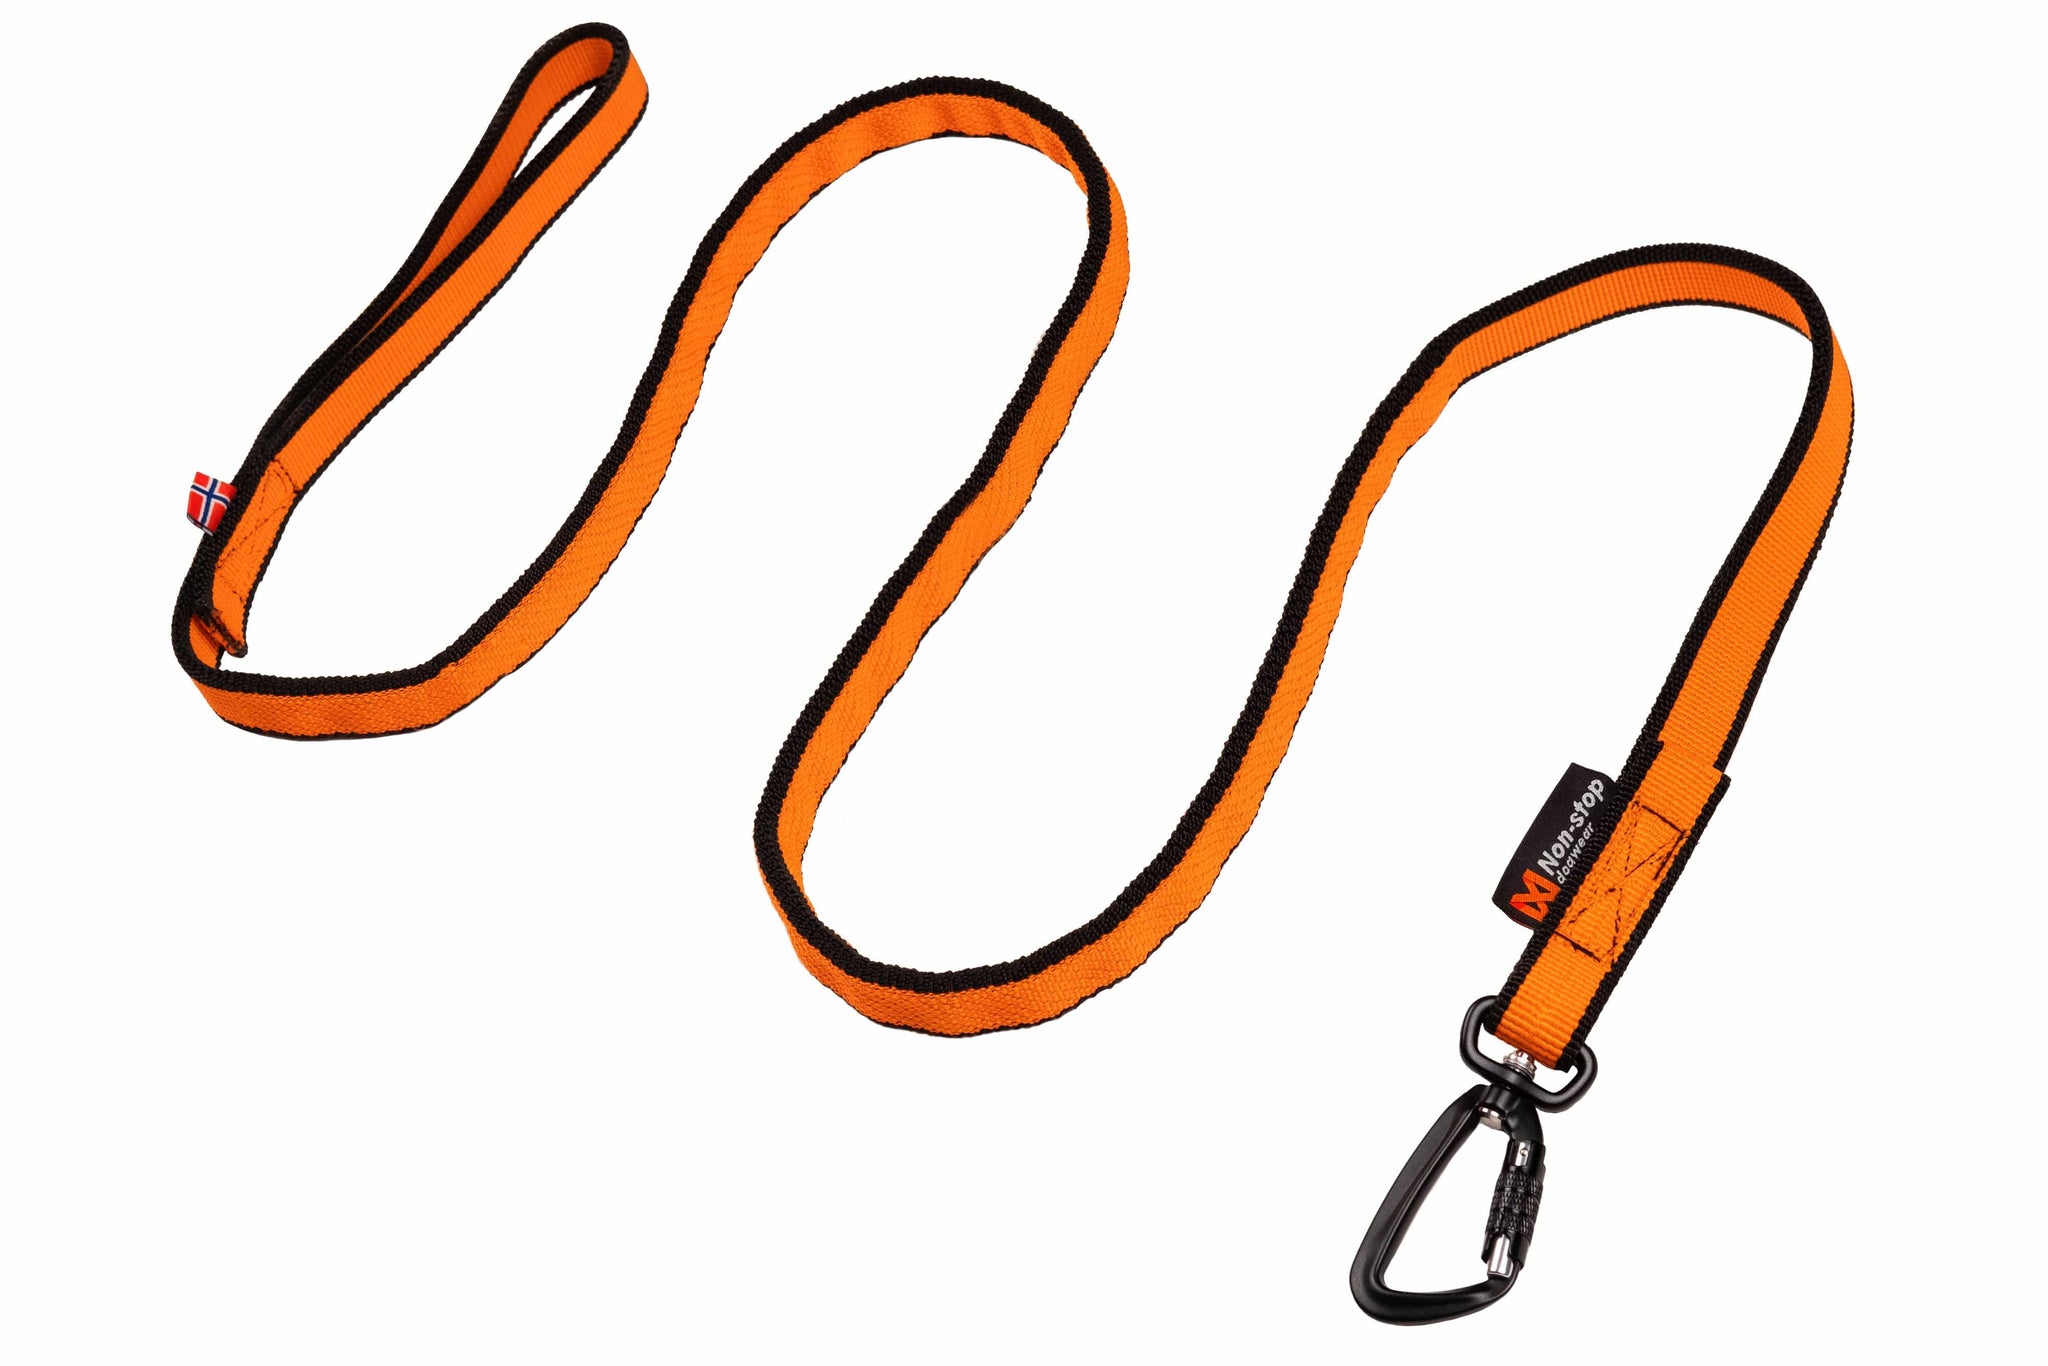 The bungee leash in an orange colour